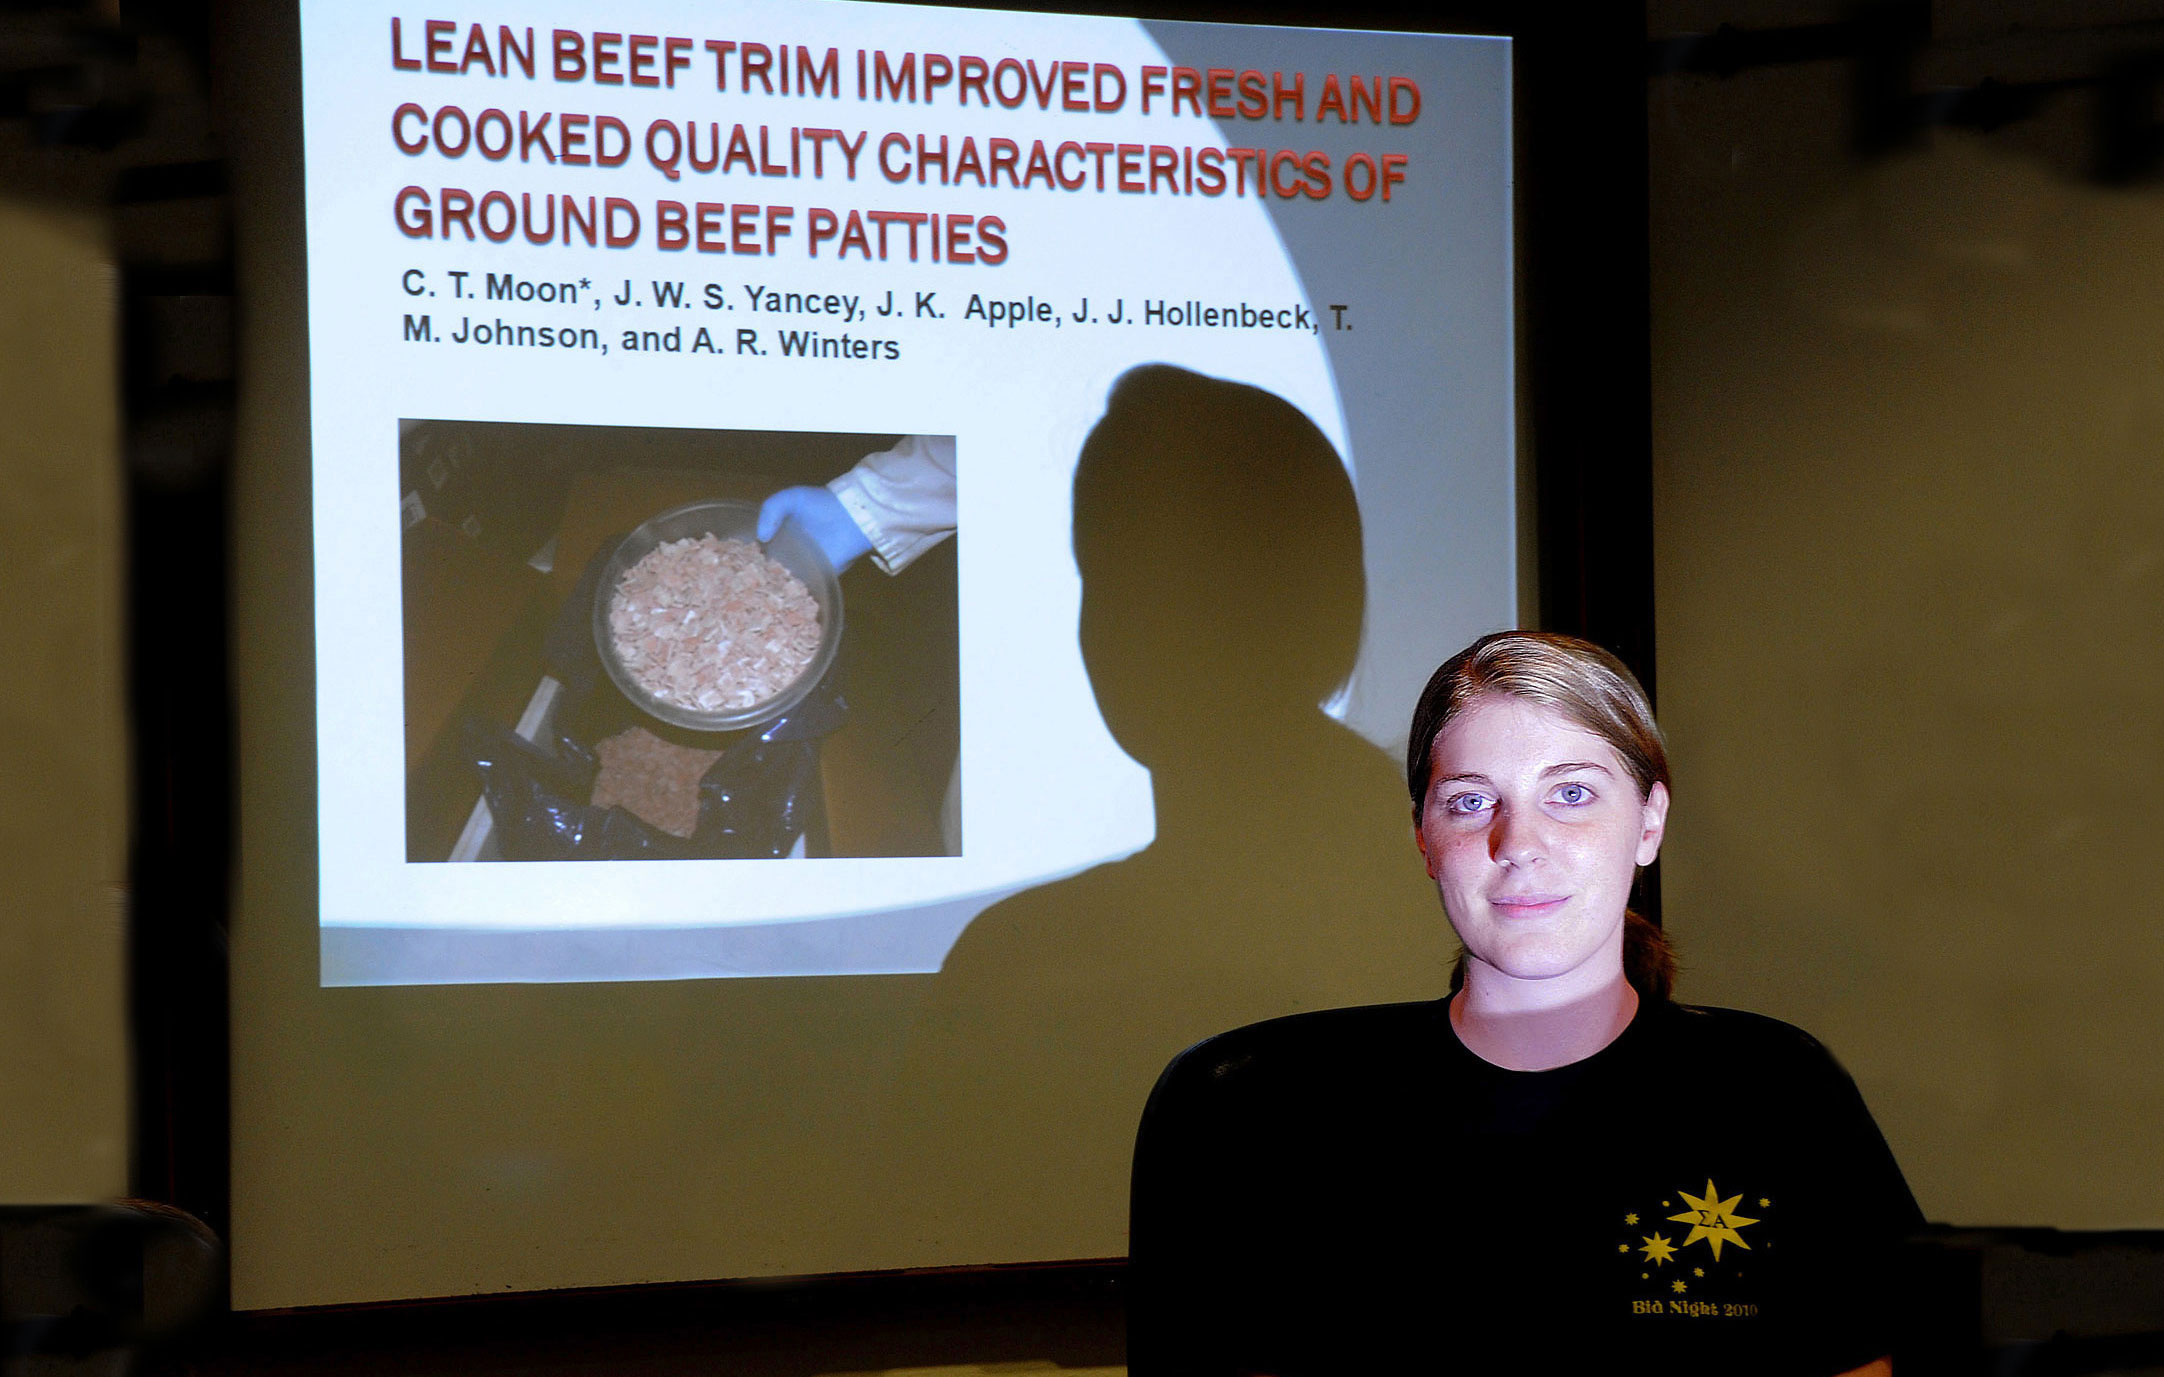 Courtney Moon shows the title slide from her presentation on a research project that found that ground beef patty quality was improved by adding "lean finely textured beef." 

